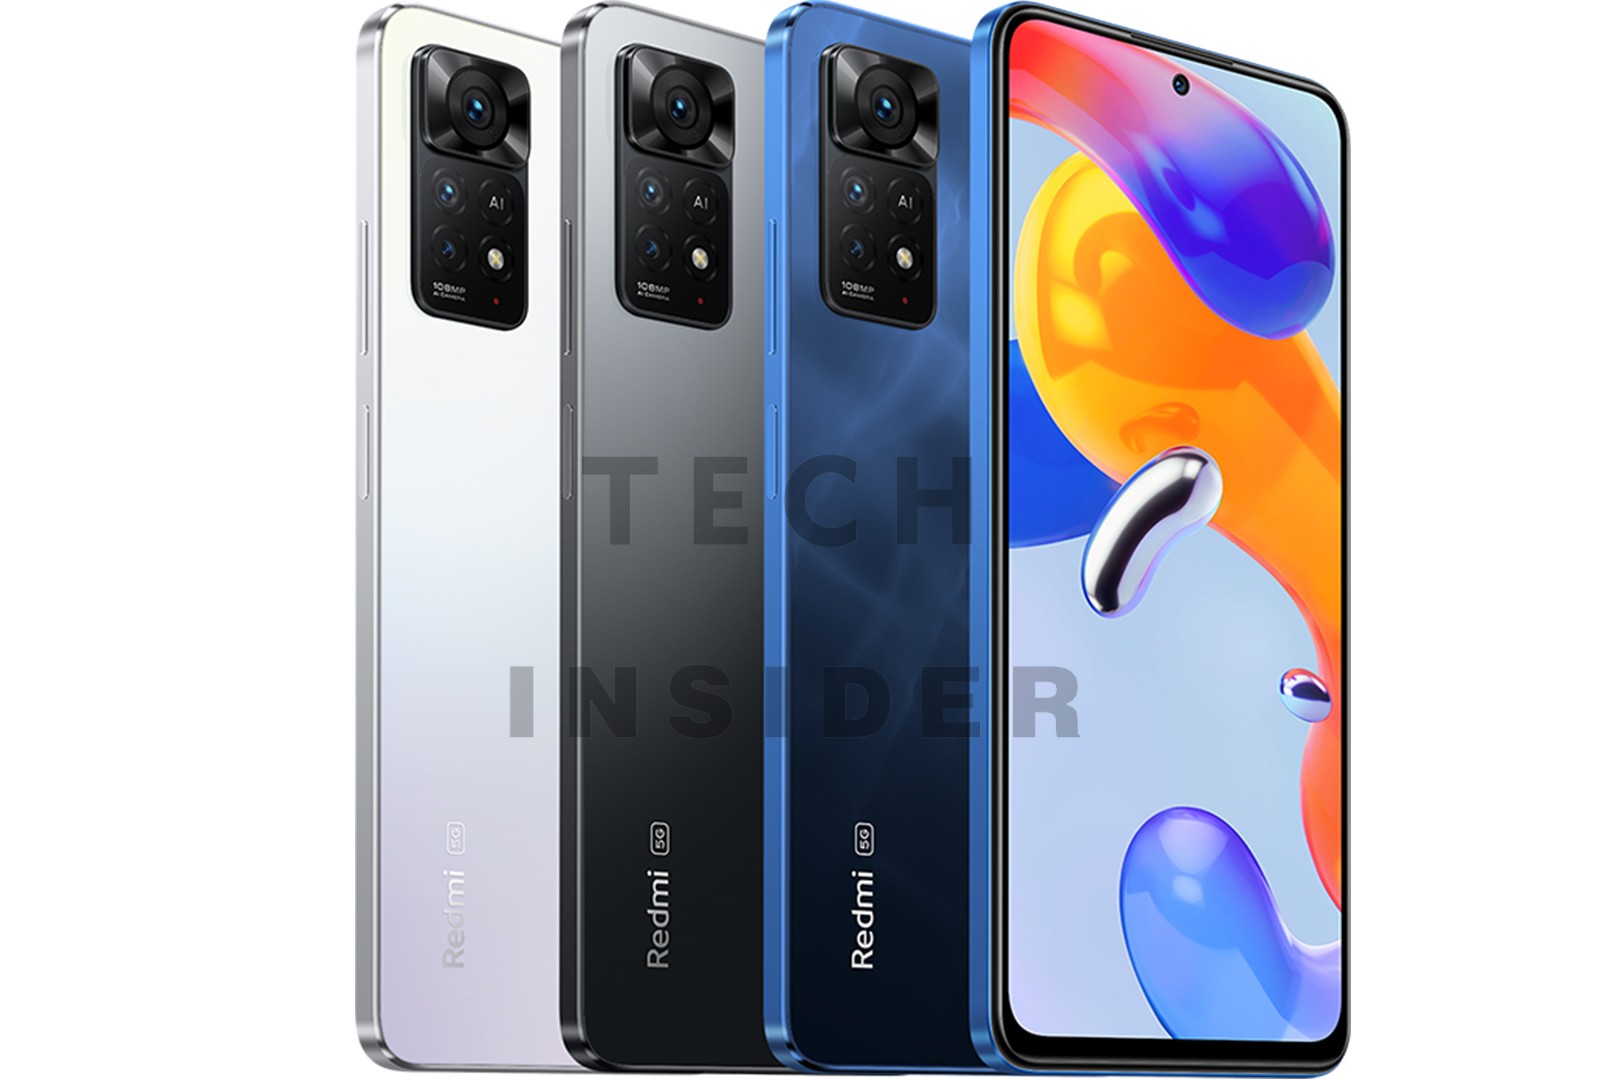 Leaked images of the global variant of the Redmi Note 11 Pro in multiple color options.